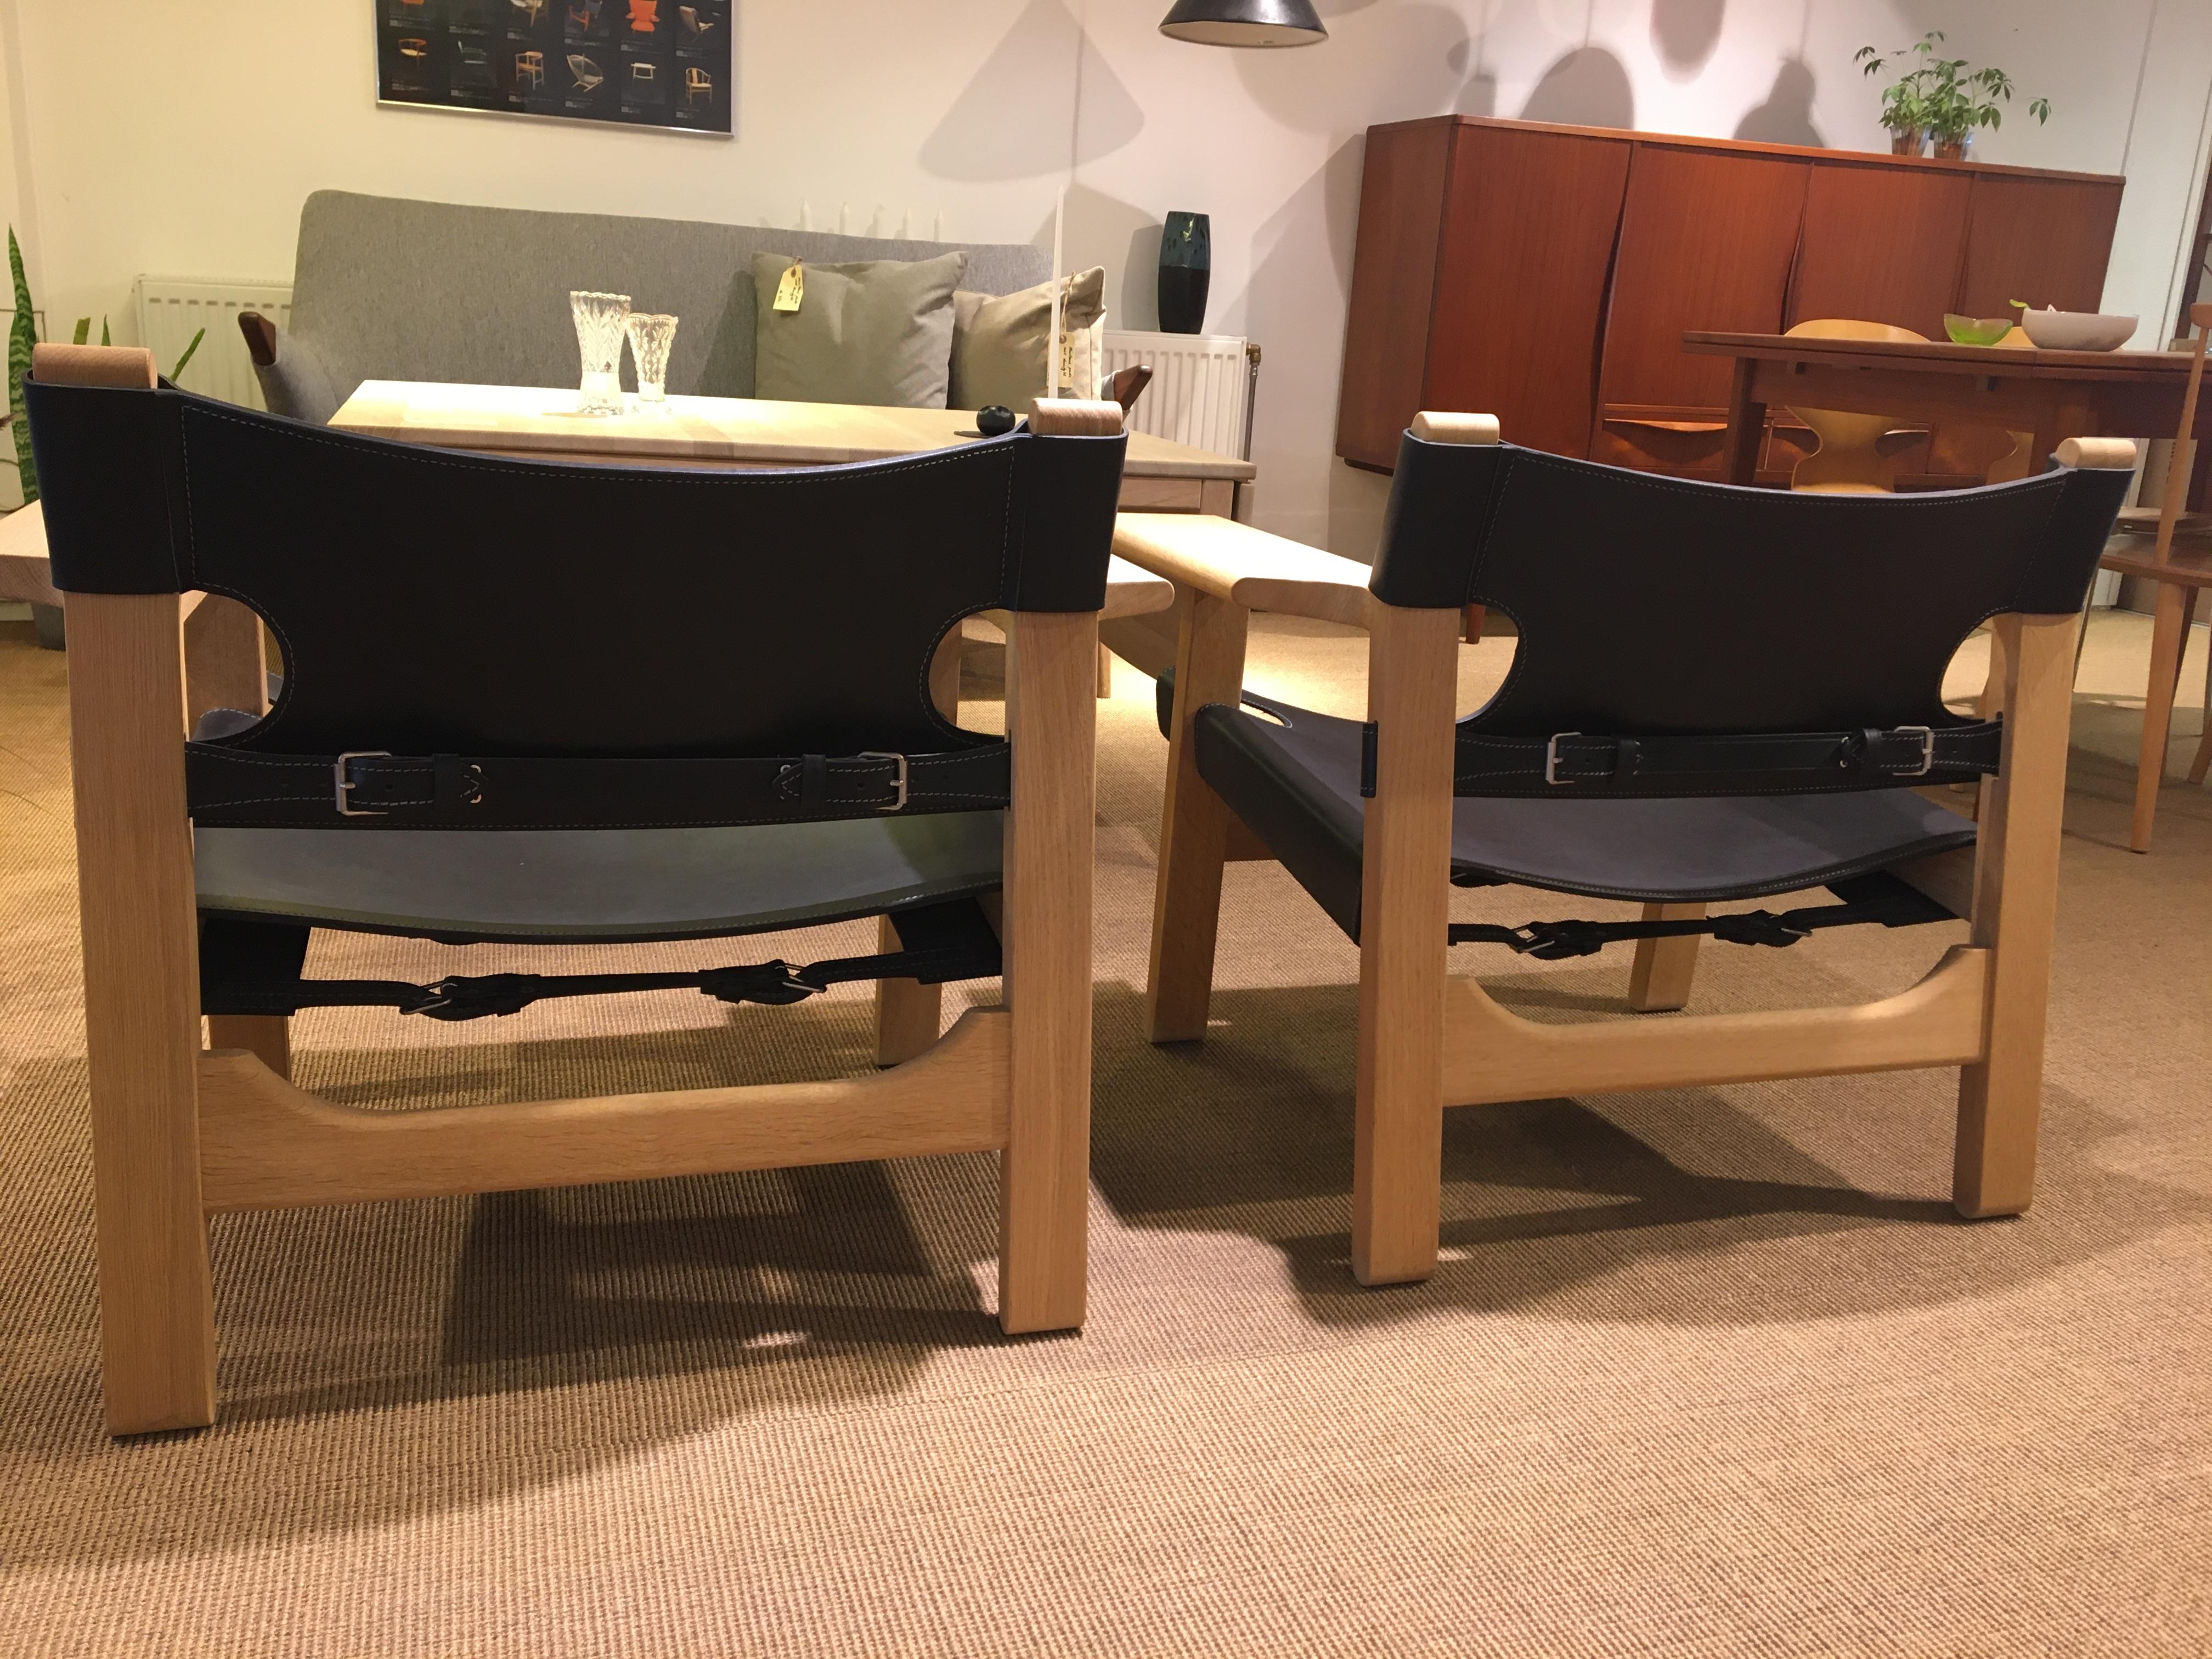 Spanish Chairs BM 2226 by Børge Mogensen In Good Condition For Sale In Odense, Denmark